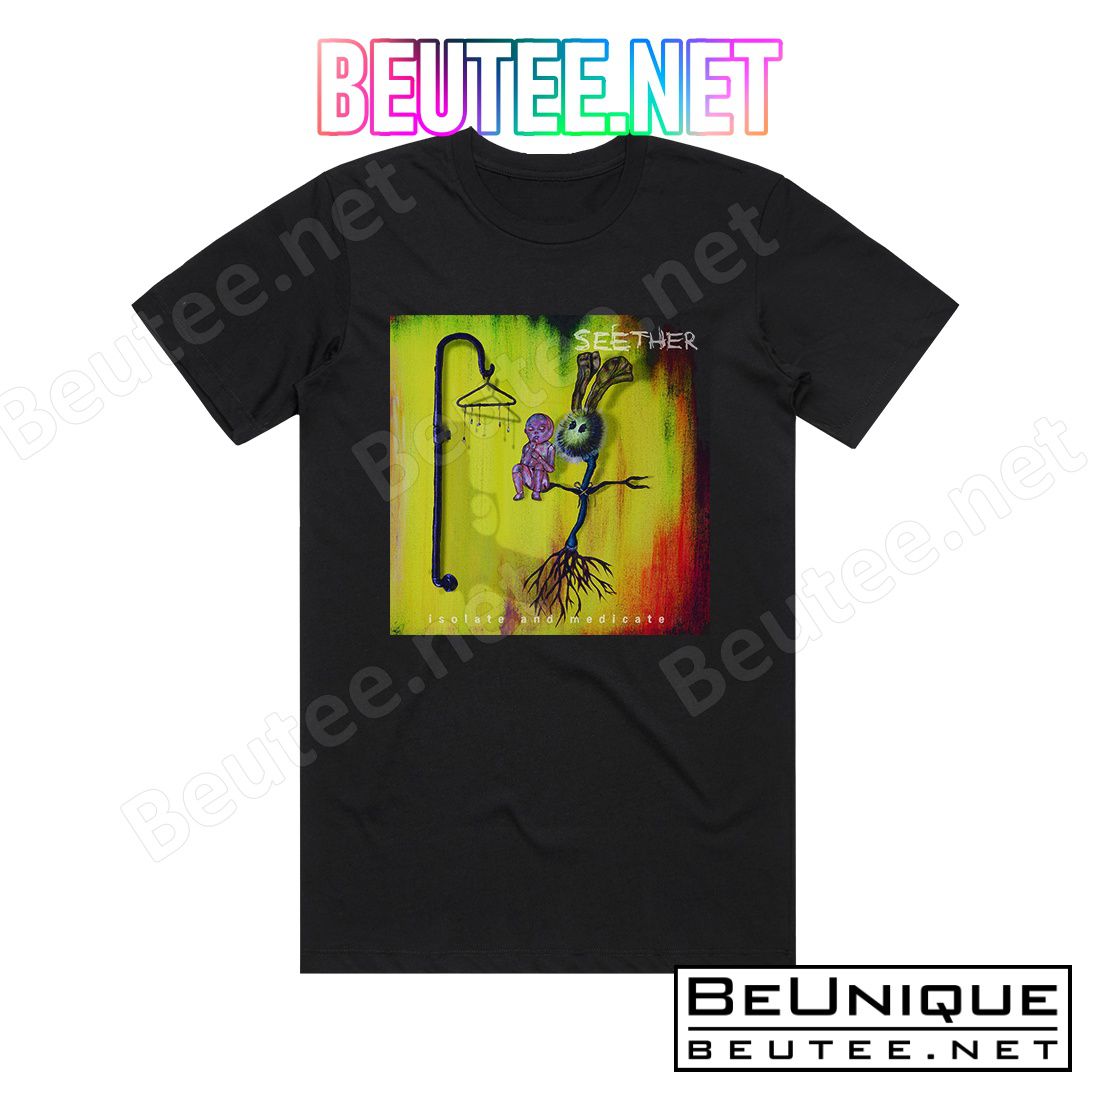 Seether Isolate And Medicate 3 Album Cover T-Shirt